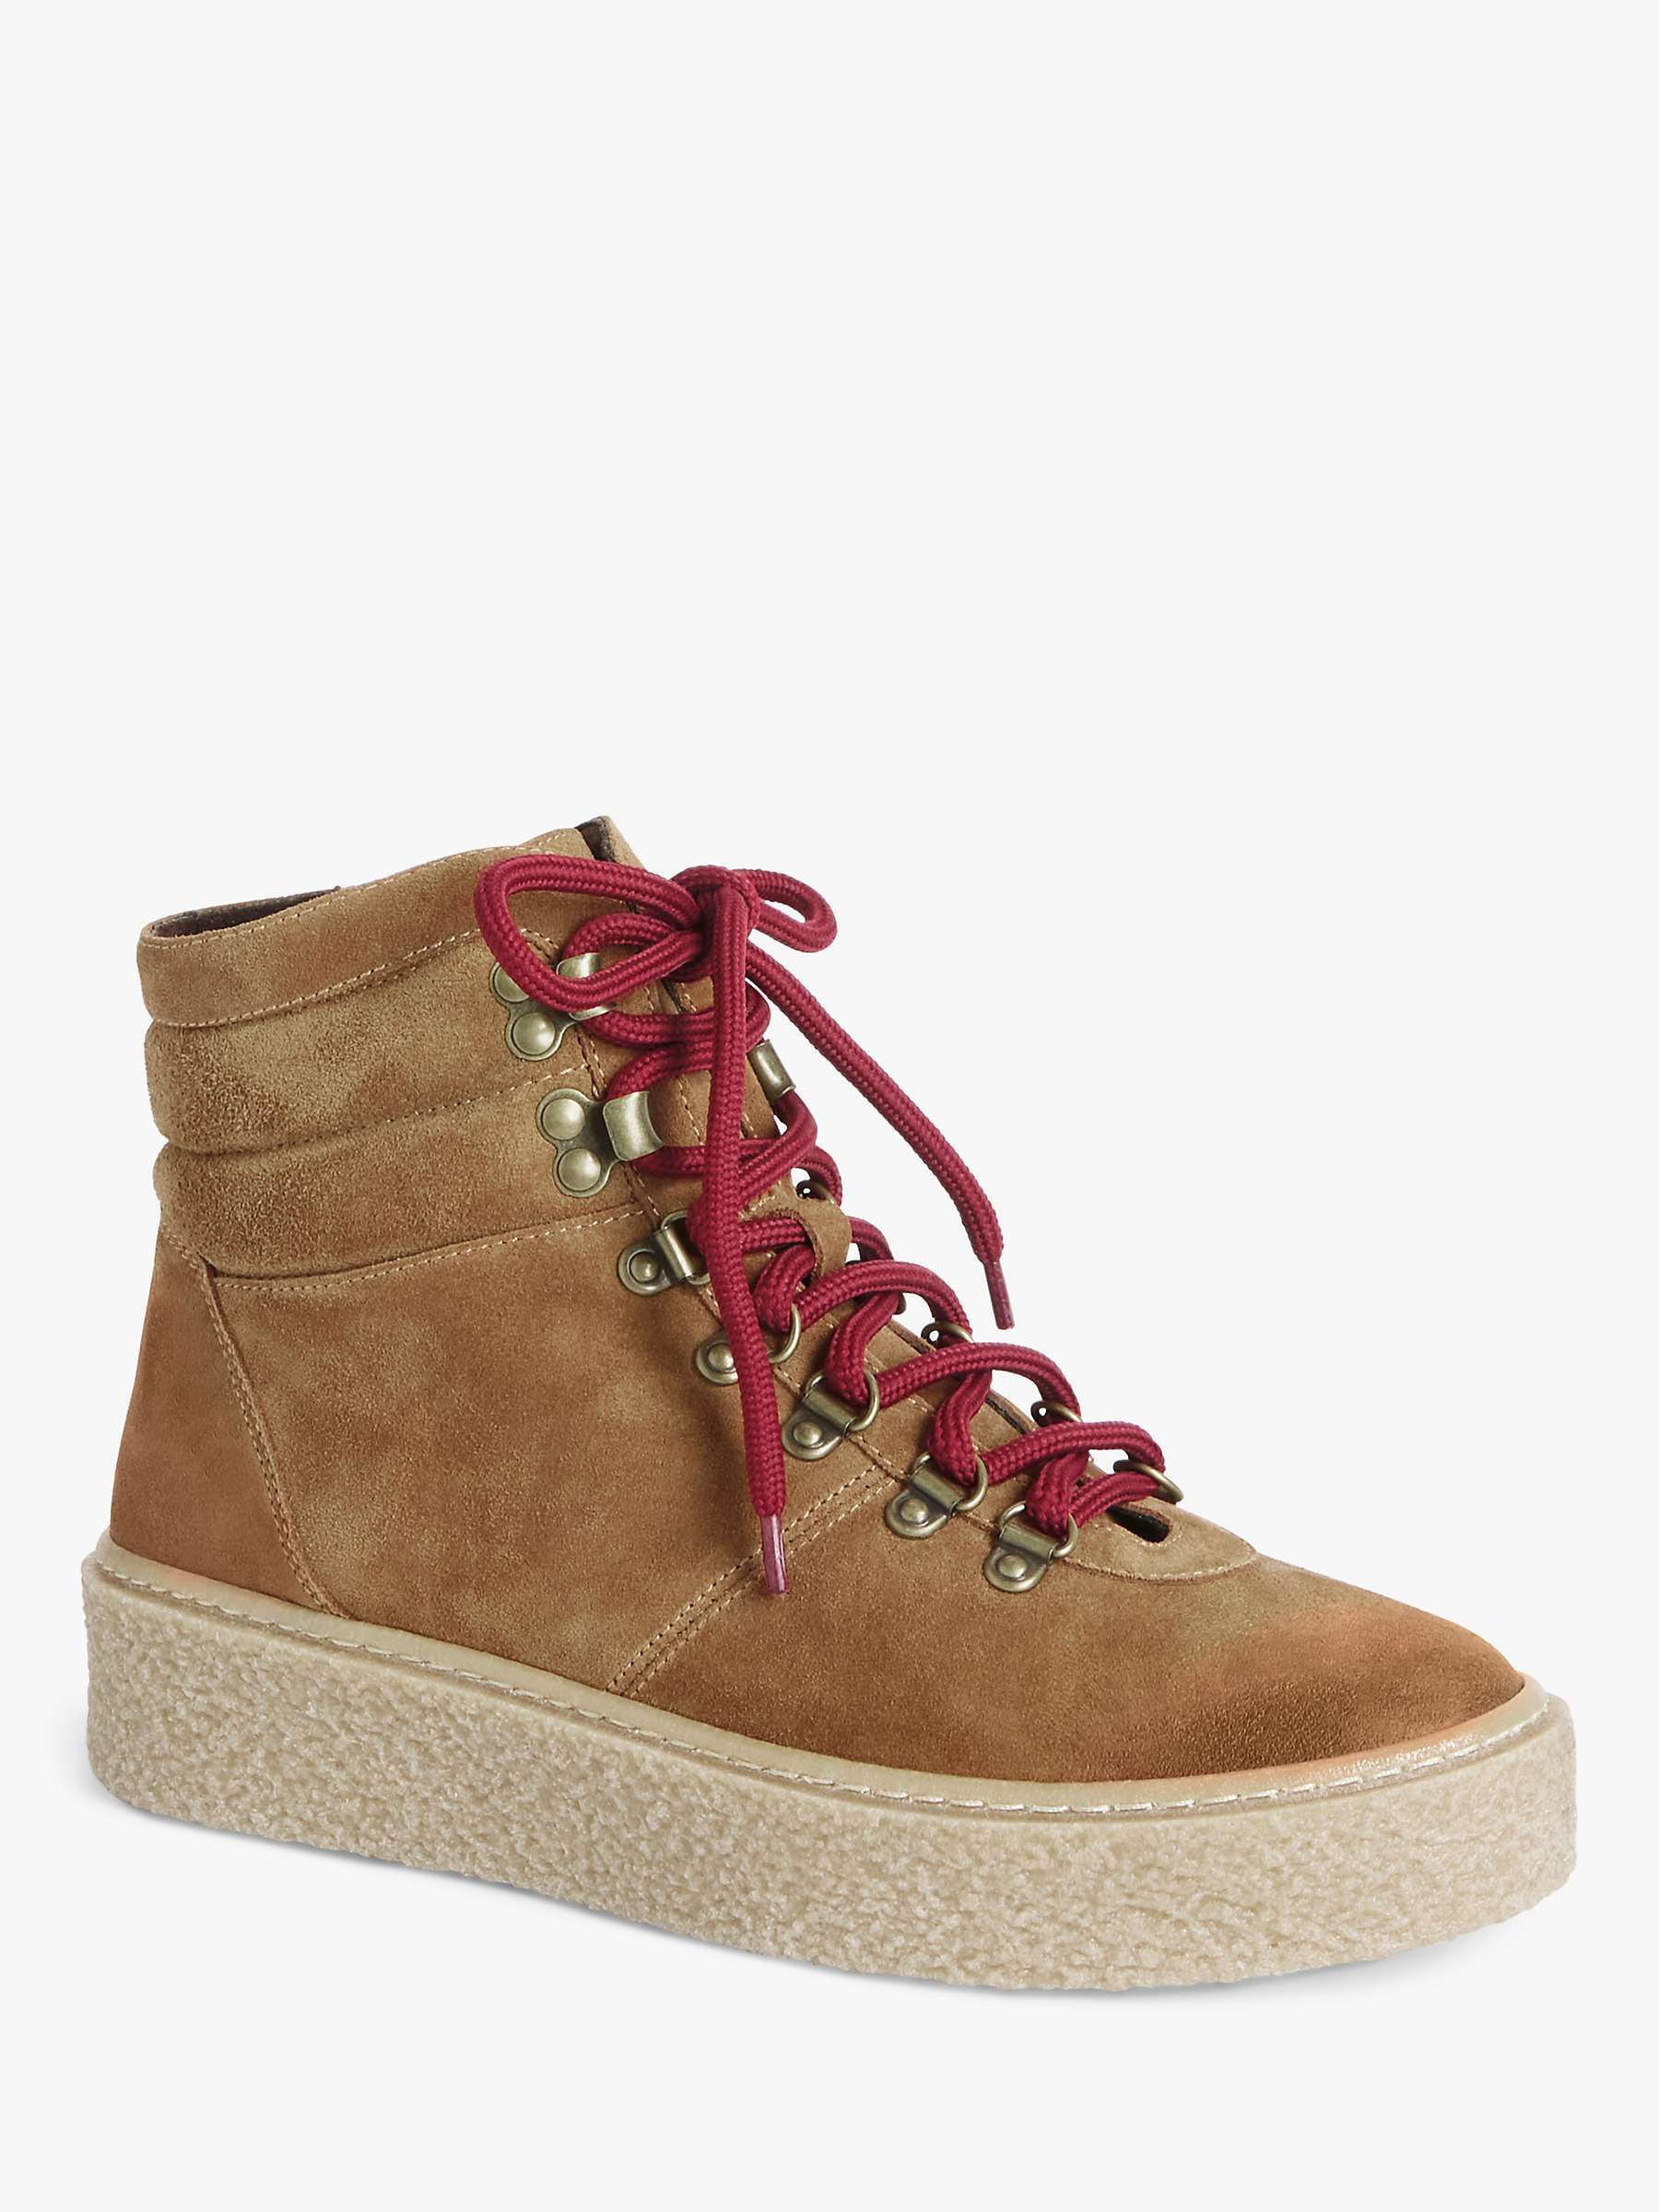 Buy AND/OR Penina Suede Crepe Sole Ankle Boots, Tan Online at johnlewis.com